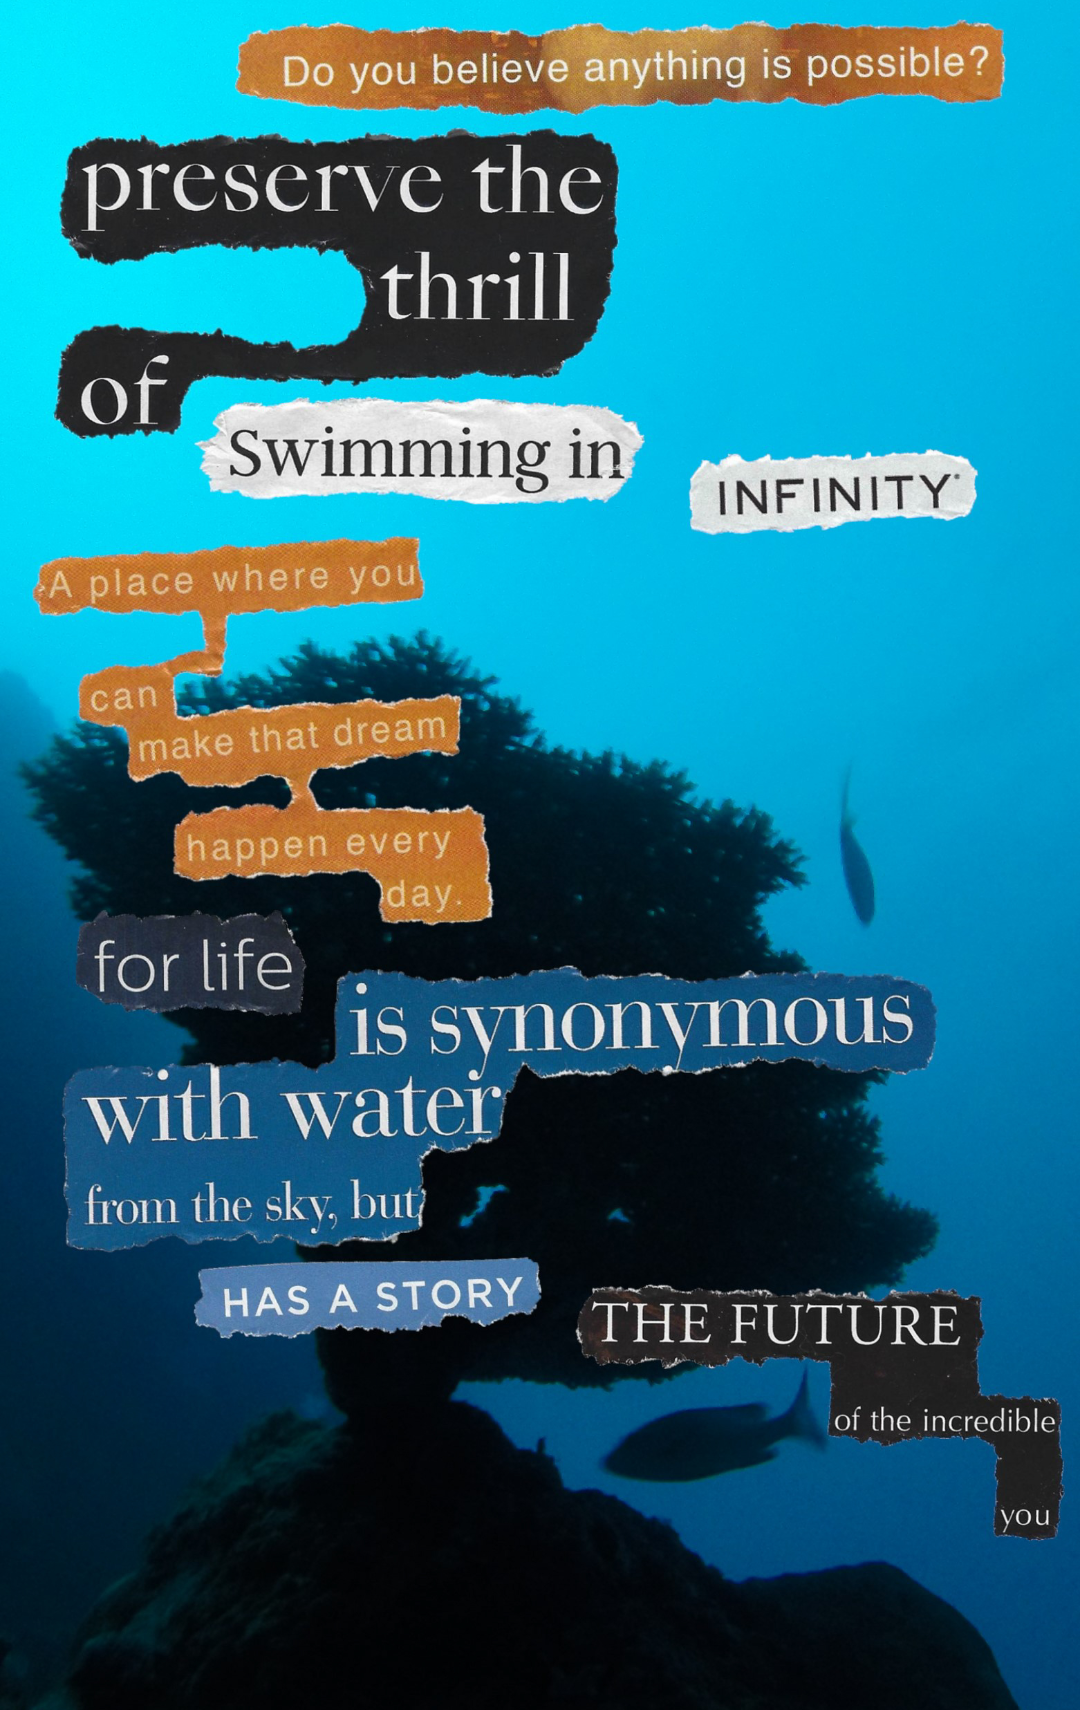 words pasted on photograph of undersea life that says do you believe
        			anything is possible preserve the thrill of swimming in infinity a place
        			where you can make that dream happen every day for life is synonymous
        			with water from the sky but has a story the future of the incredible you